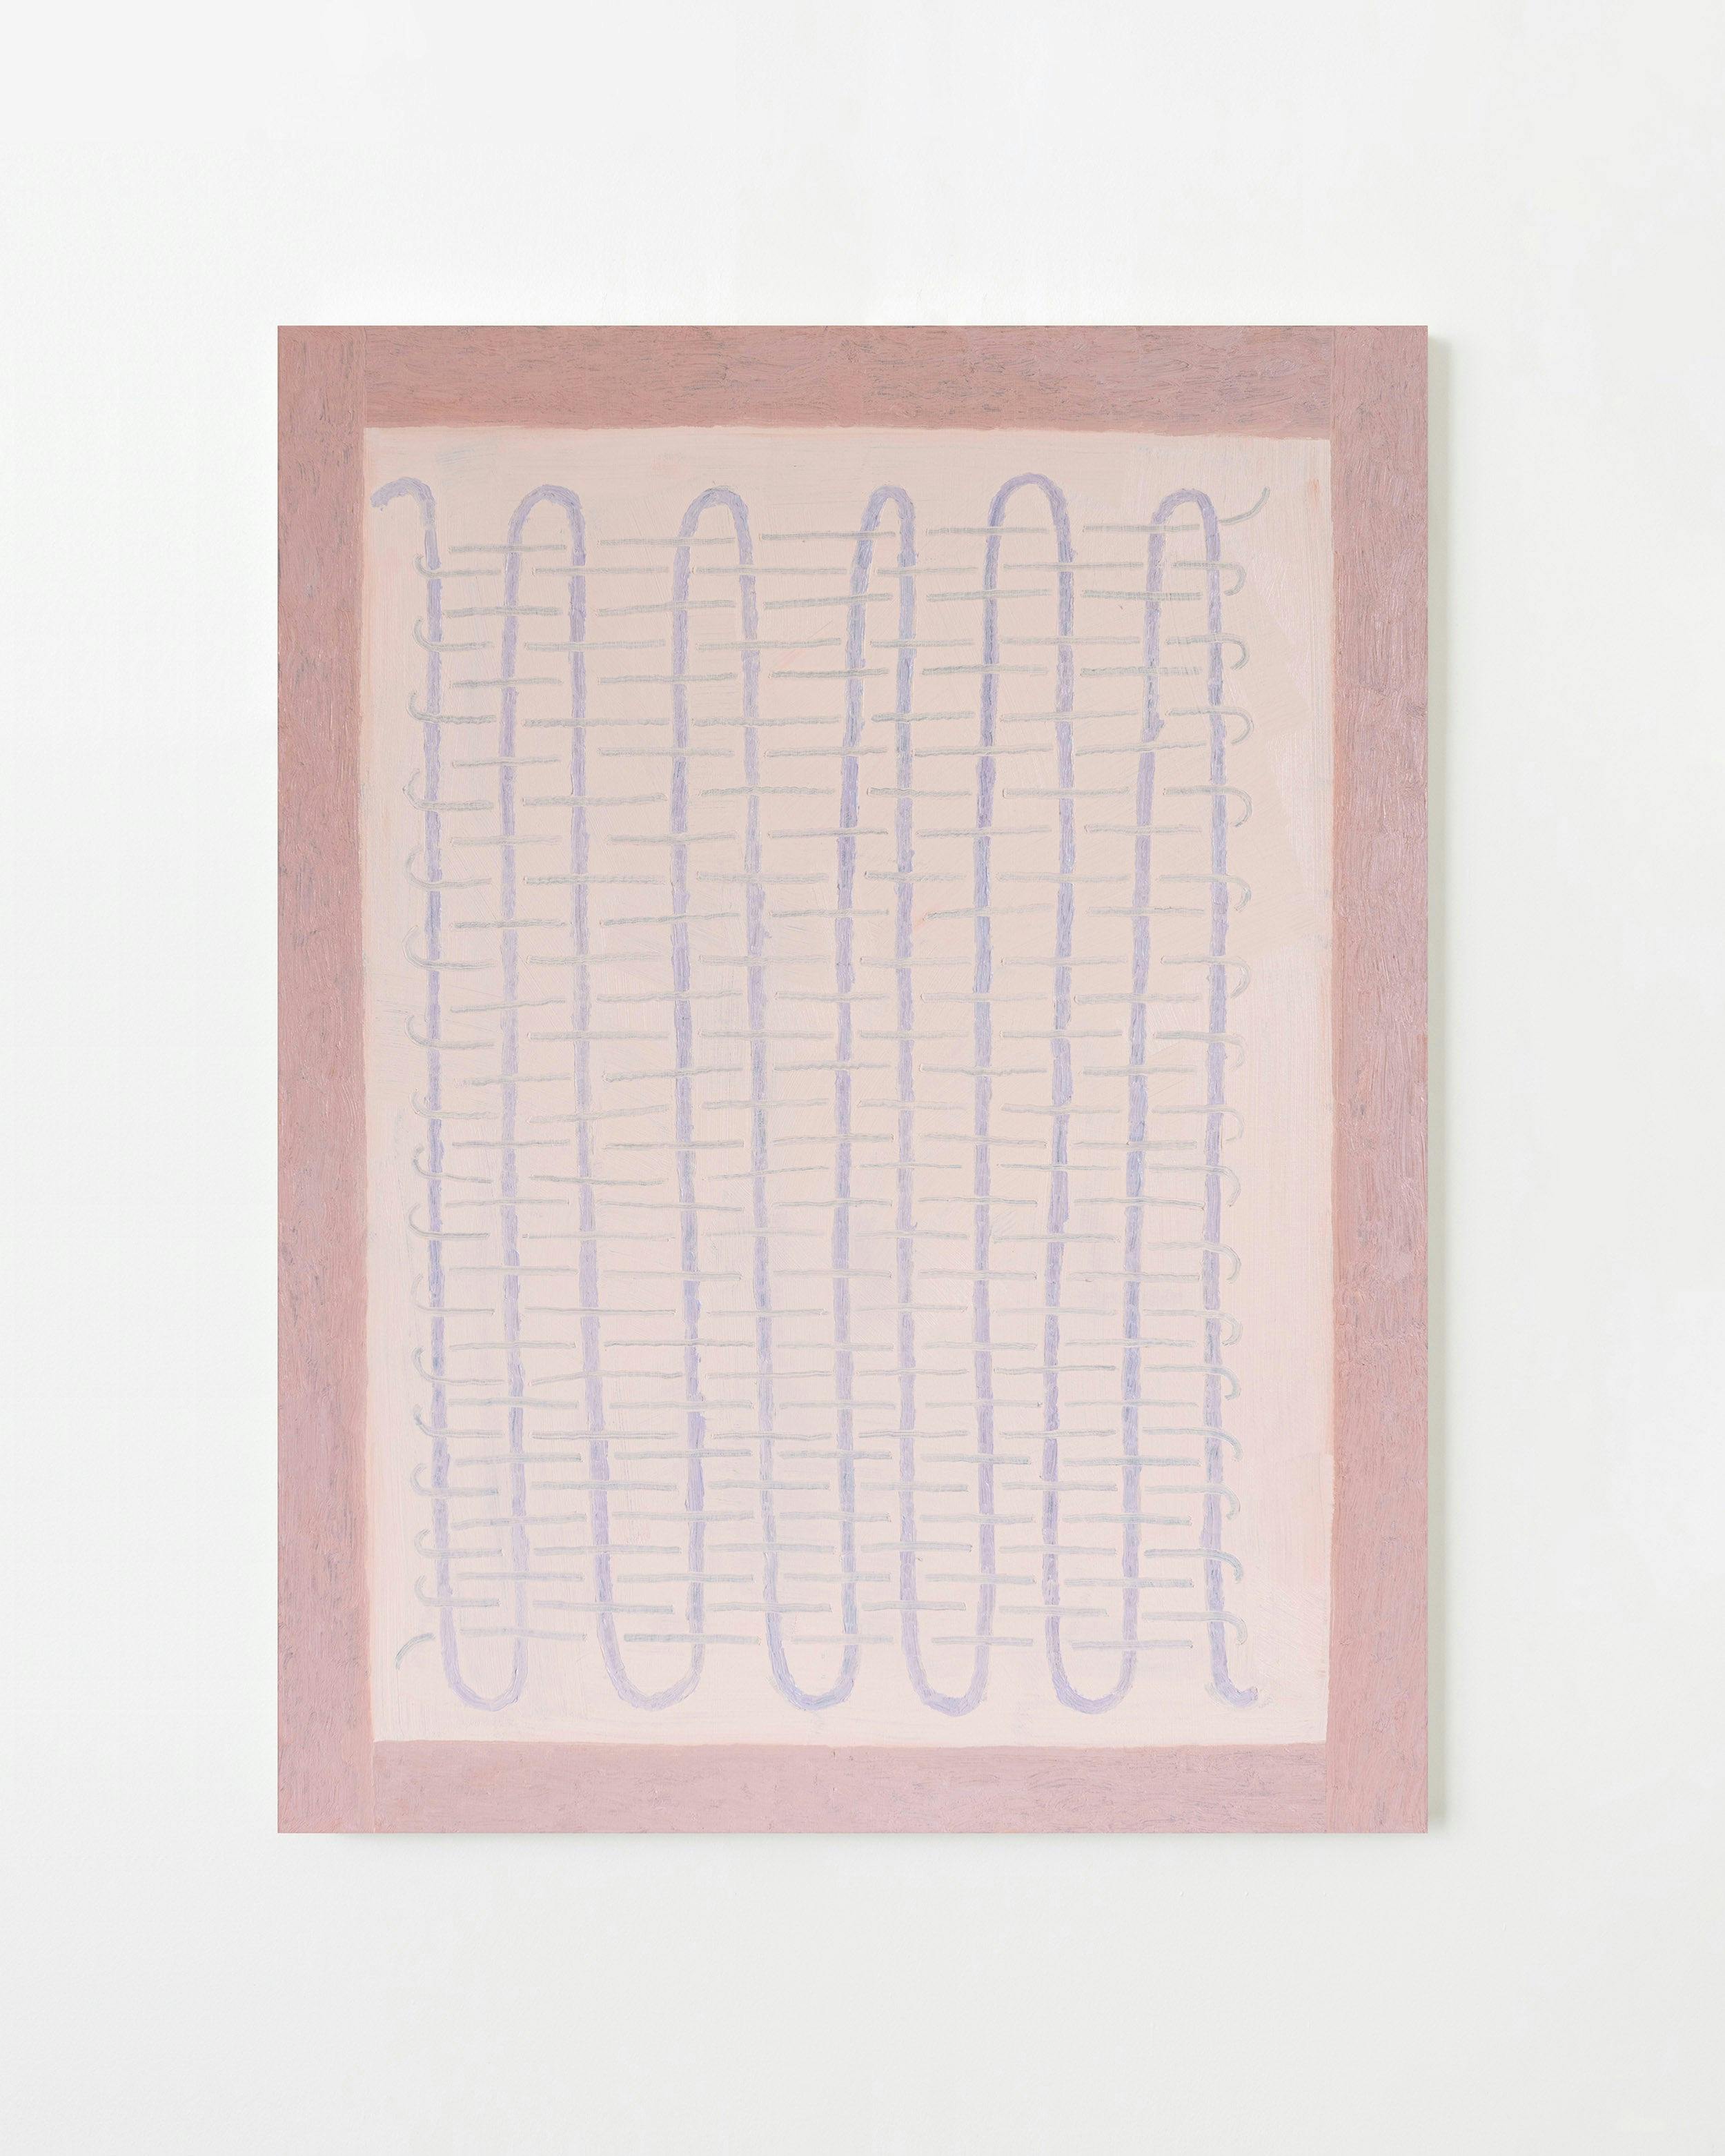 Painting by Aschely Vaughan Cone titled "Tabby Weave I, Peach".